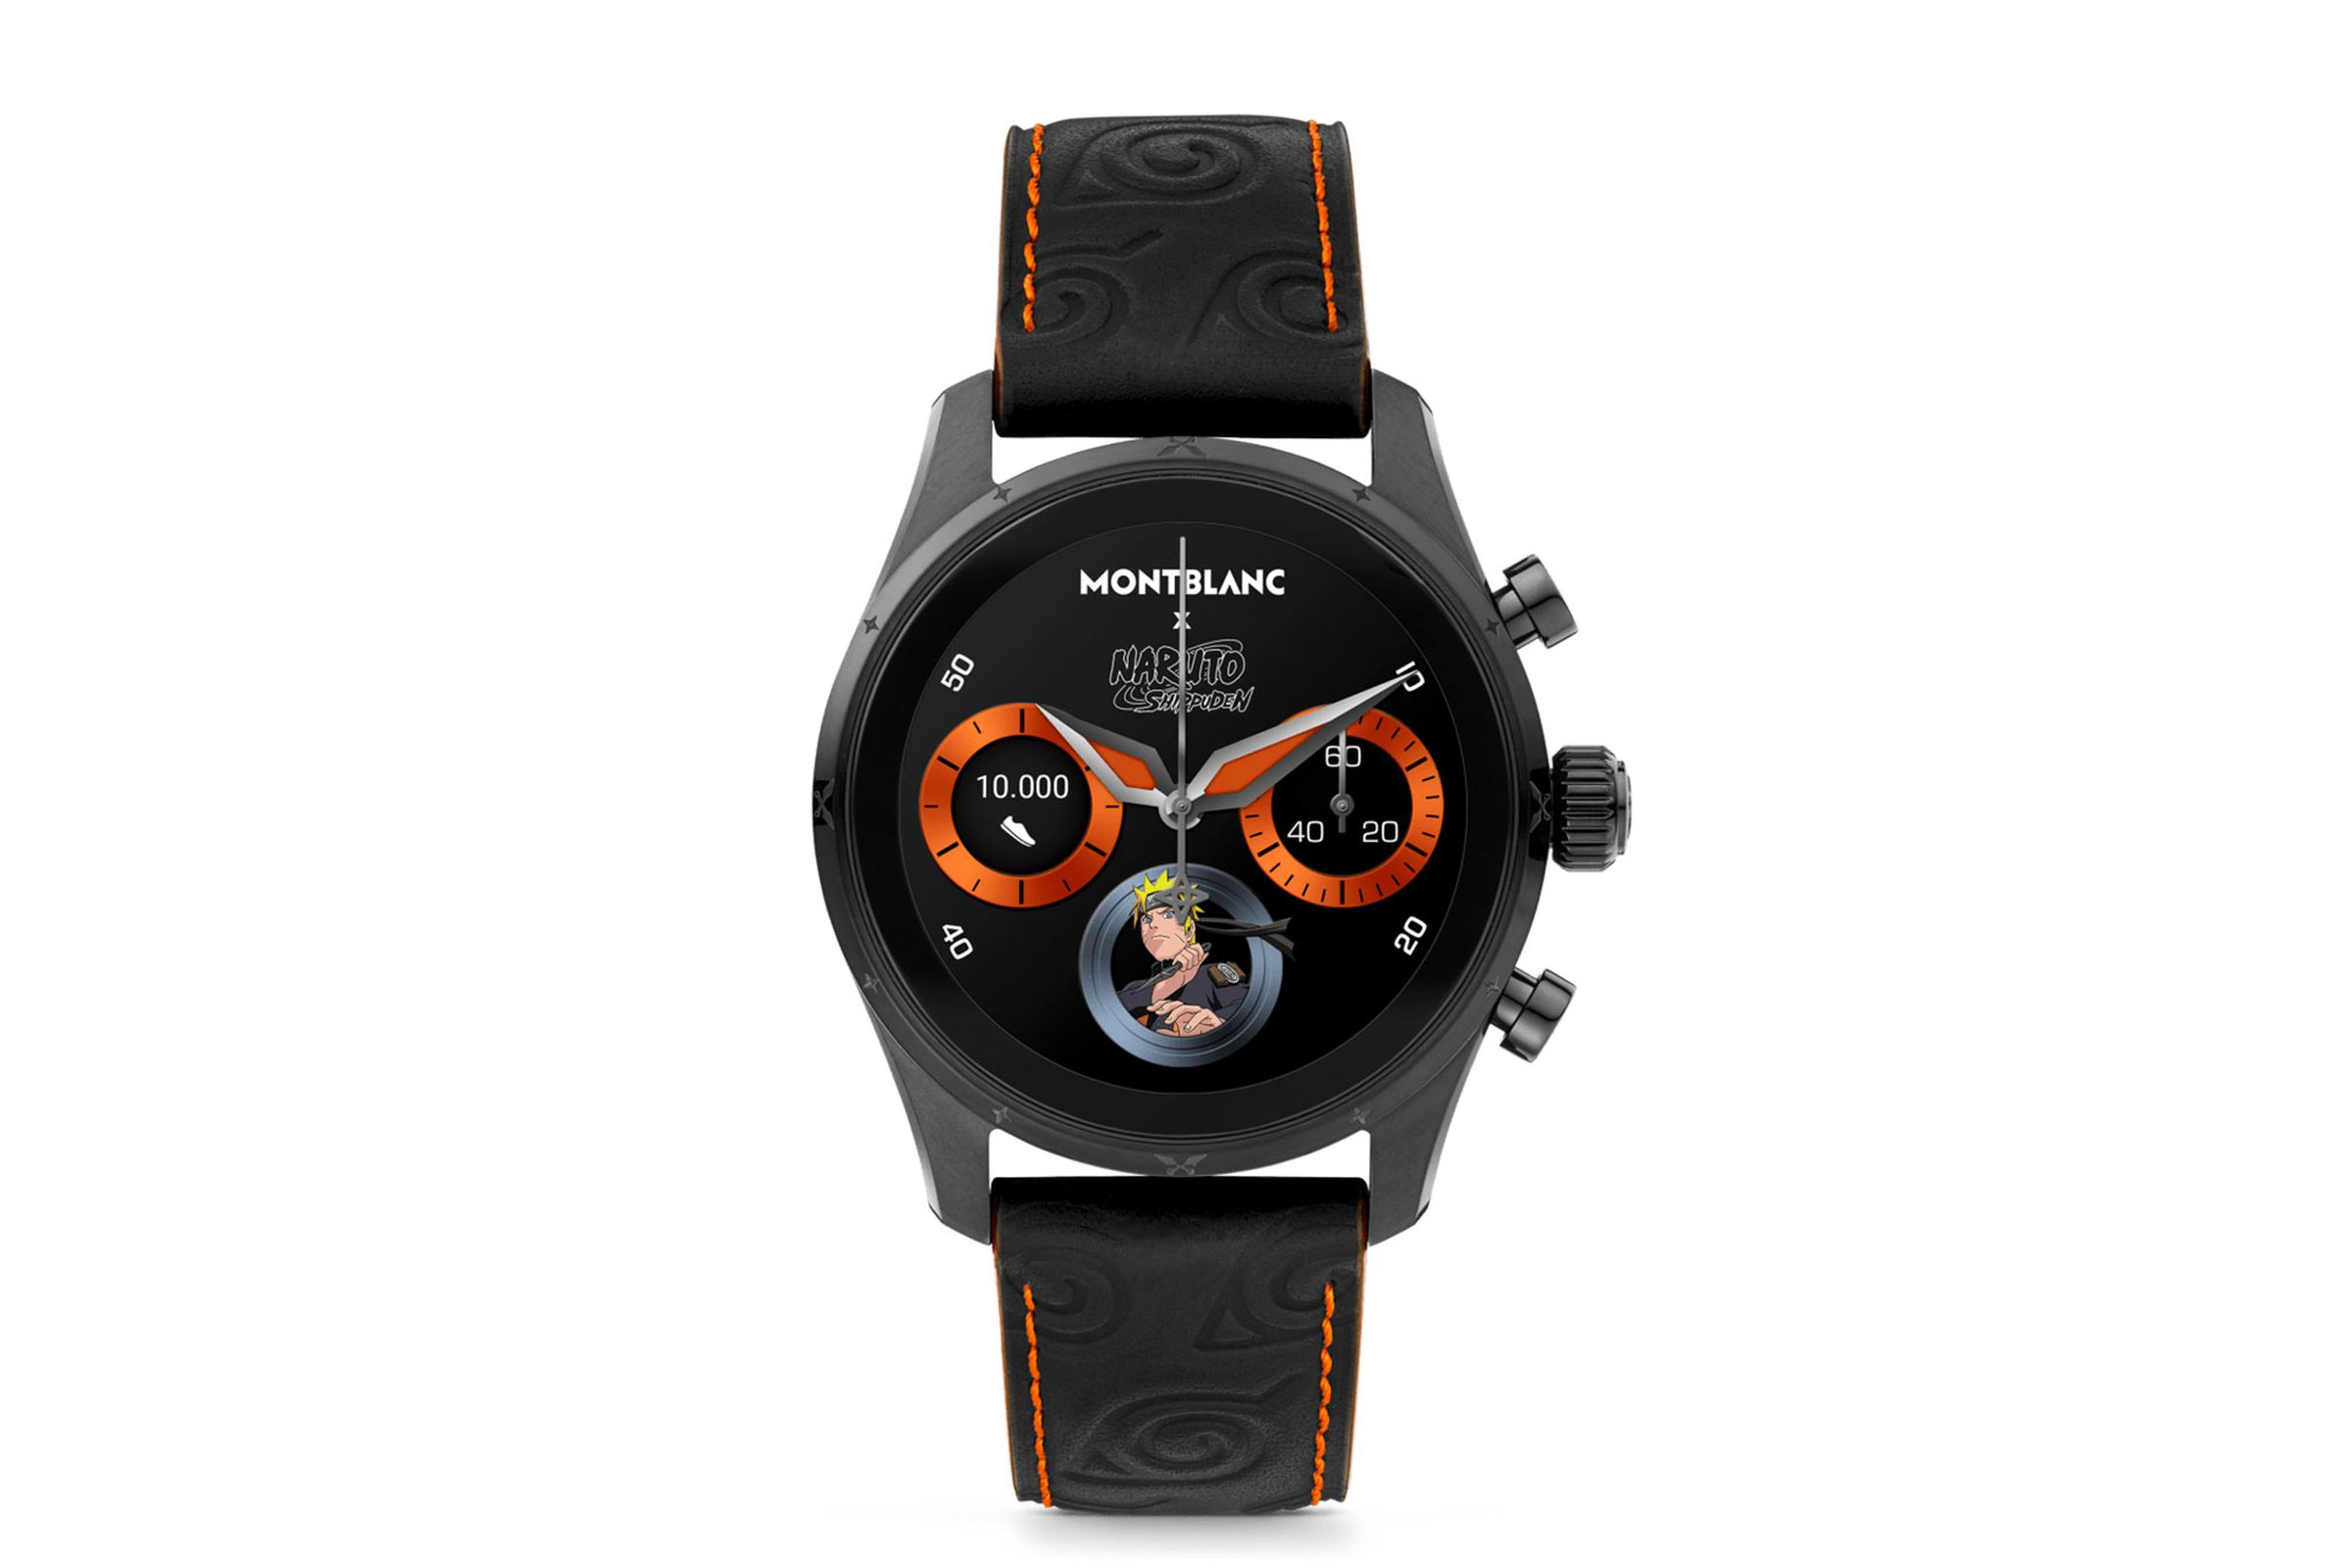 Front-facing image of the Montblanc x Naruto Limited Edition Summit 3 smartwatch.